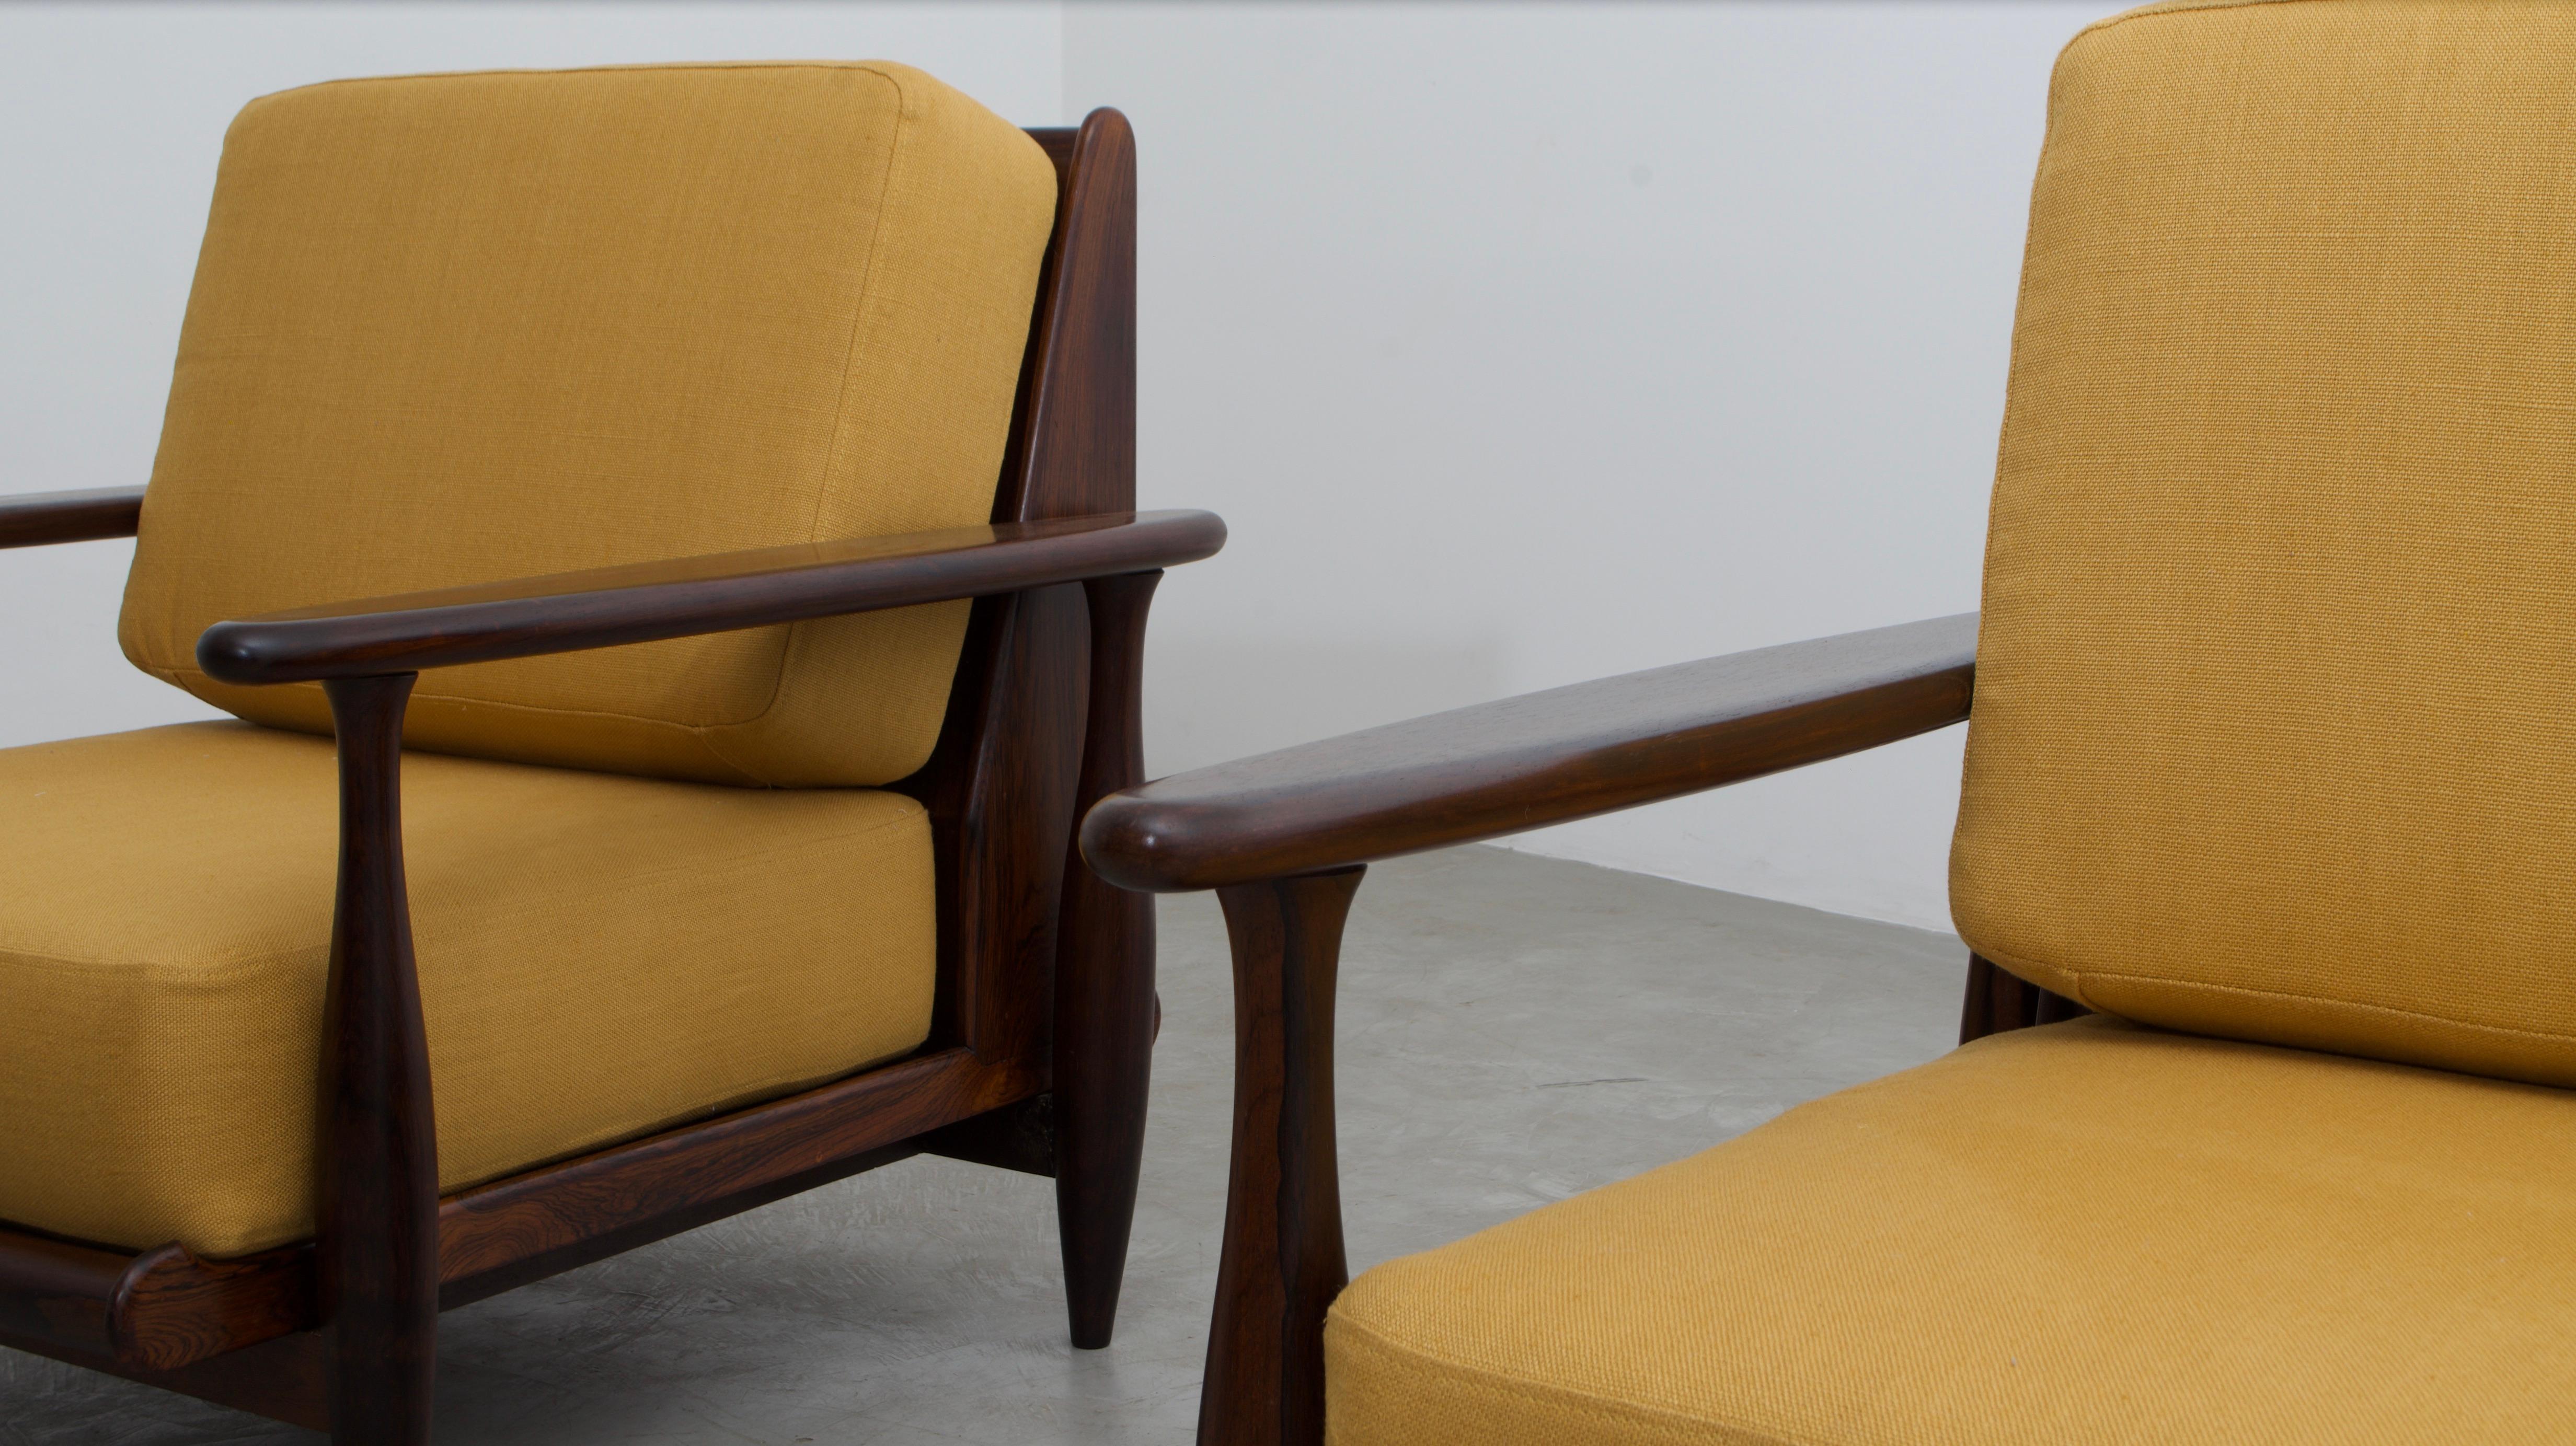 Pair of Lounge Chairs by Liceu de Artes e Ofícios, 1960's, Brazilian Mid-Century For Sale 3